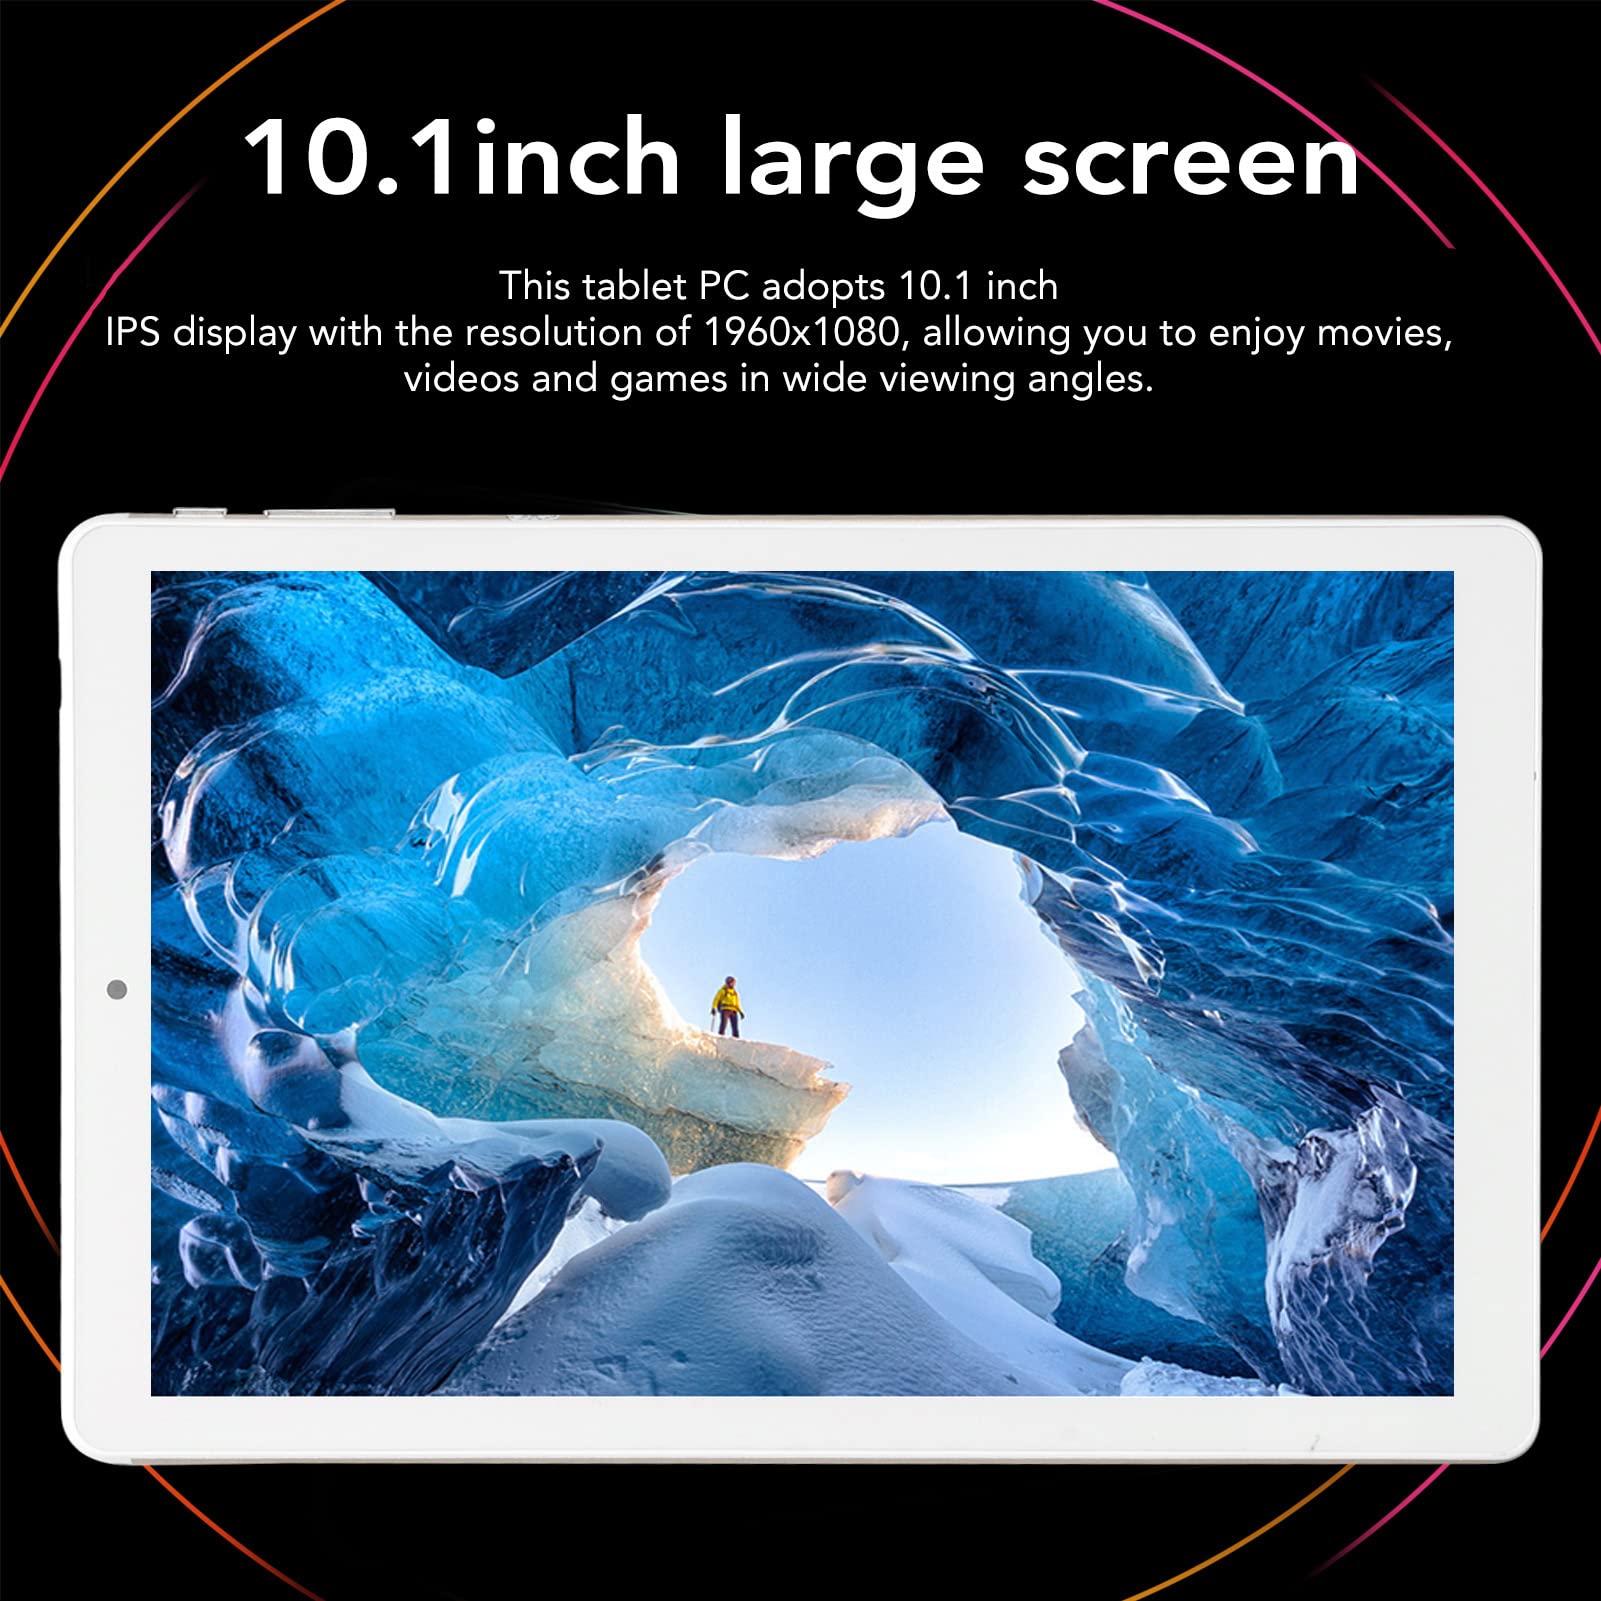 Focket 10.1 Inch Tablet, 6GB 128GB Tablet Octa Core Processor Tablet for Android 11, IPS Display HD Tablet 5G Tablet WiFi Dual SIM Portable Tablet Gaming Tablet 8800mAh Long Tablet (US Plug)